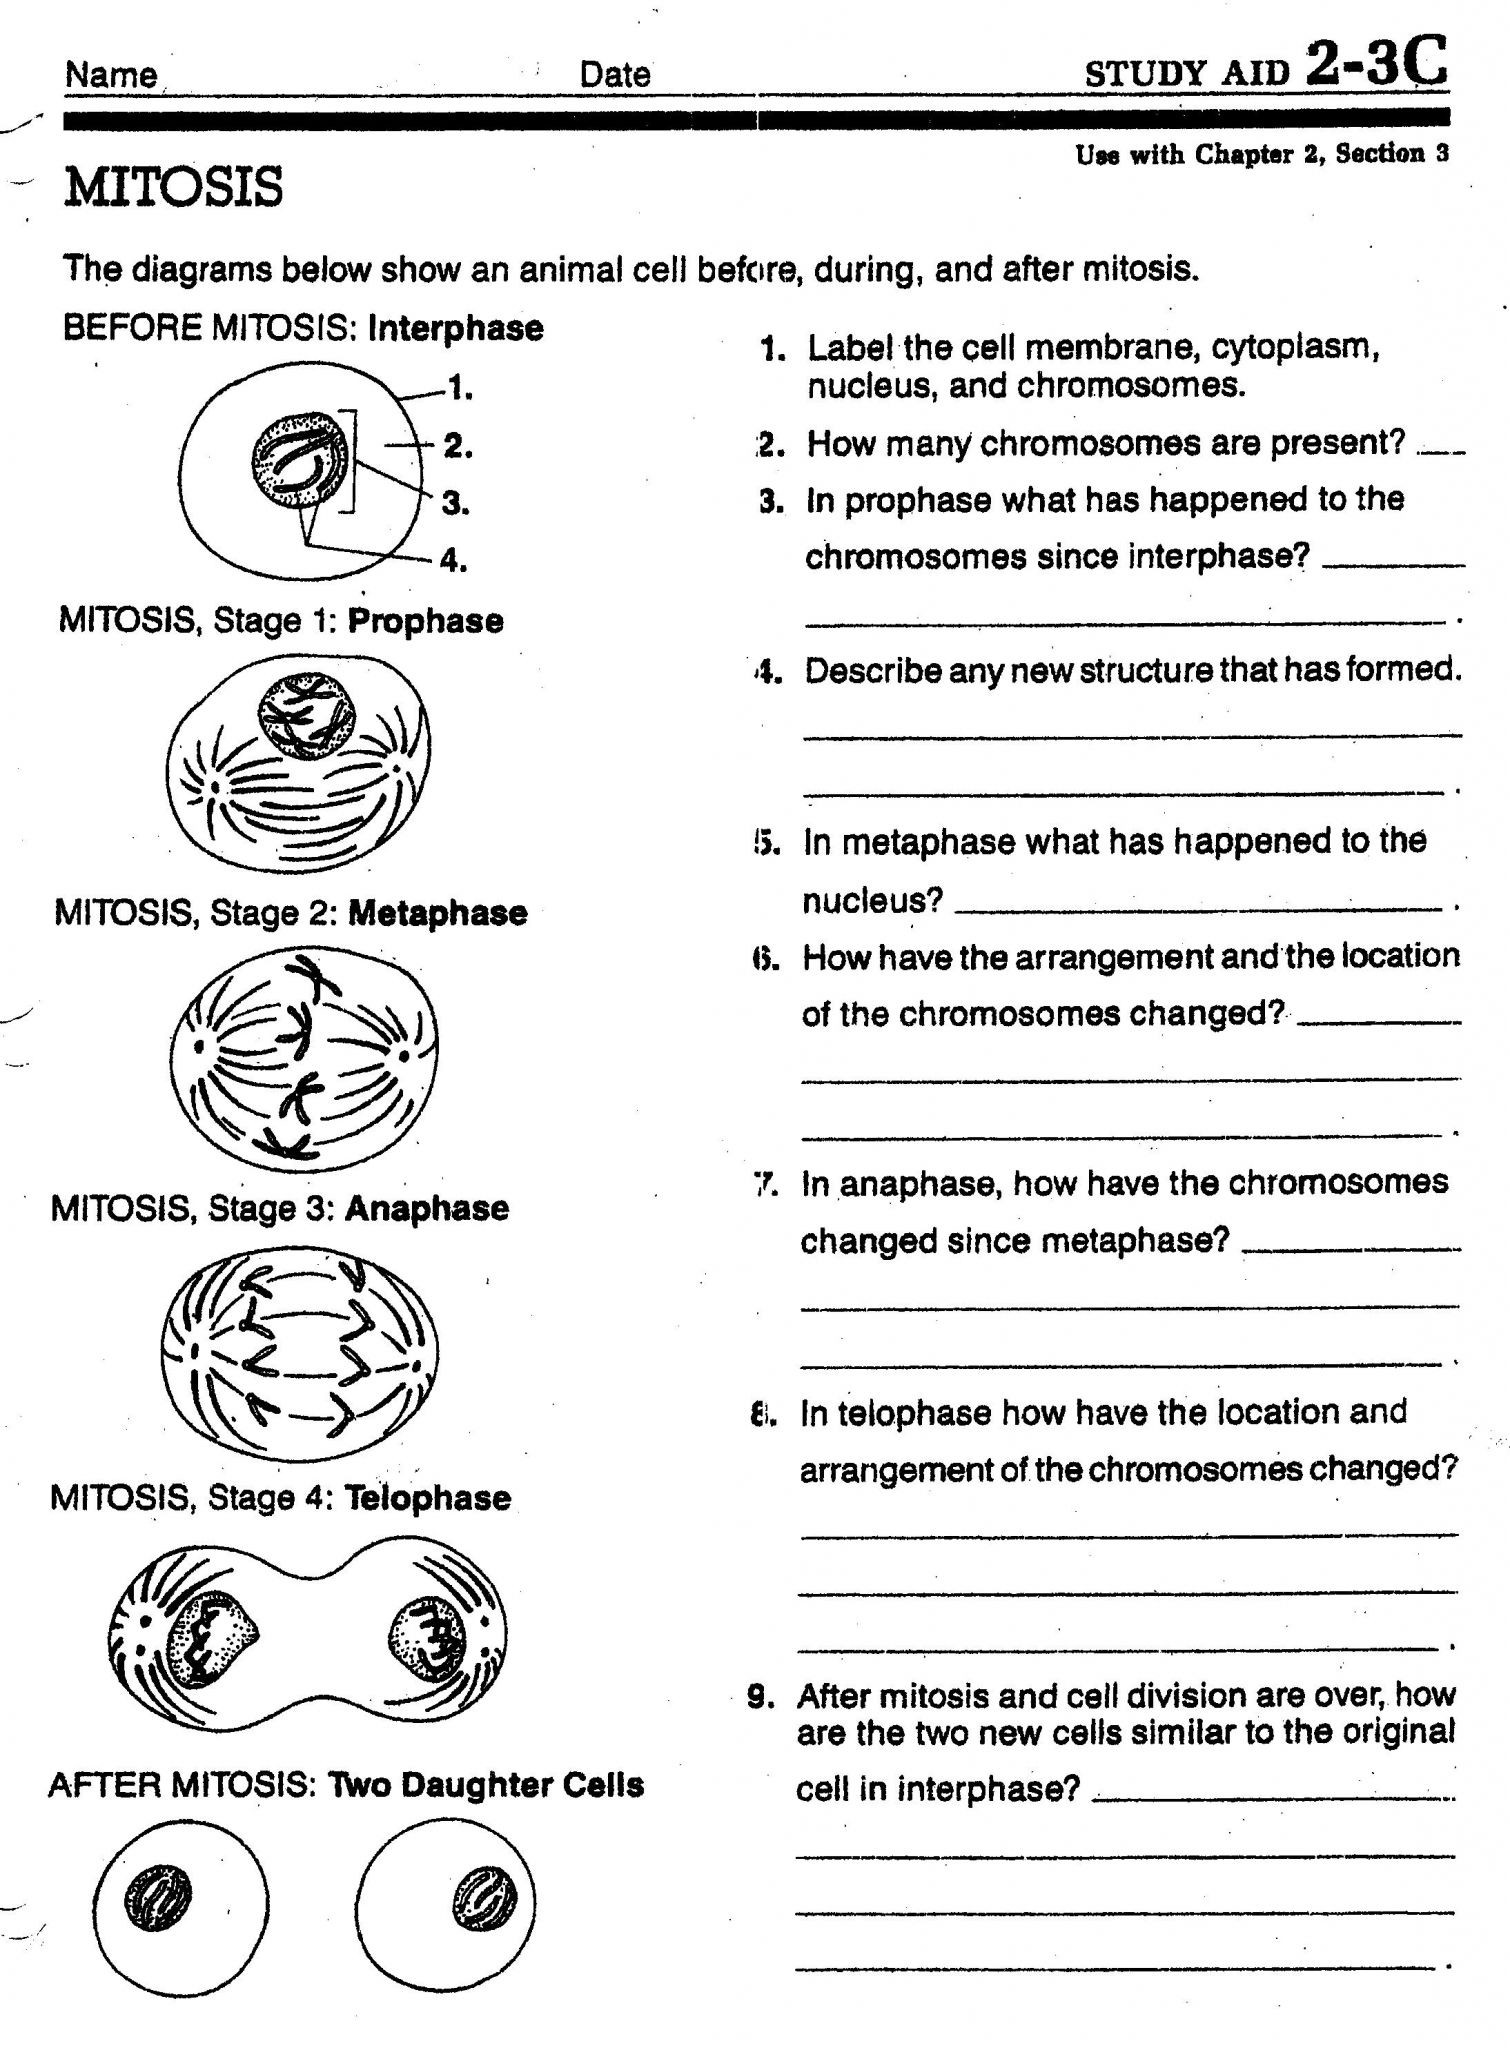 Cell Cycle and Mitosis Worksheet Cell Cycle Regulation Worksheet